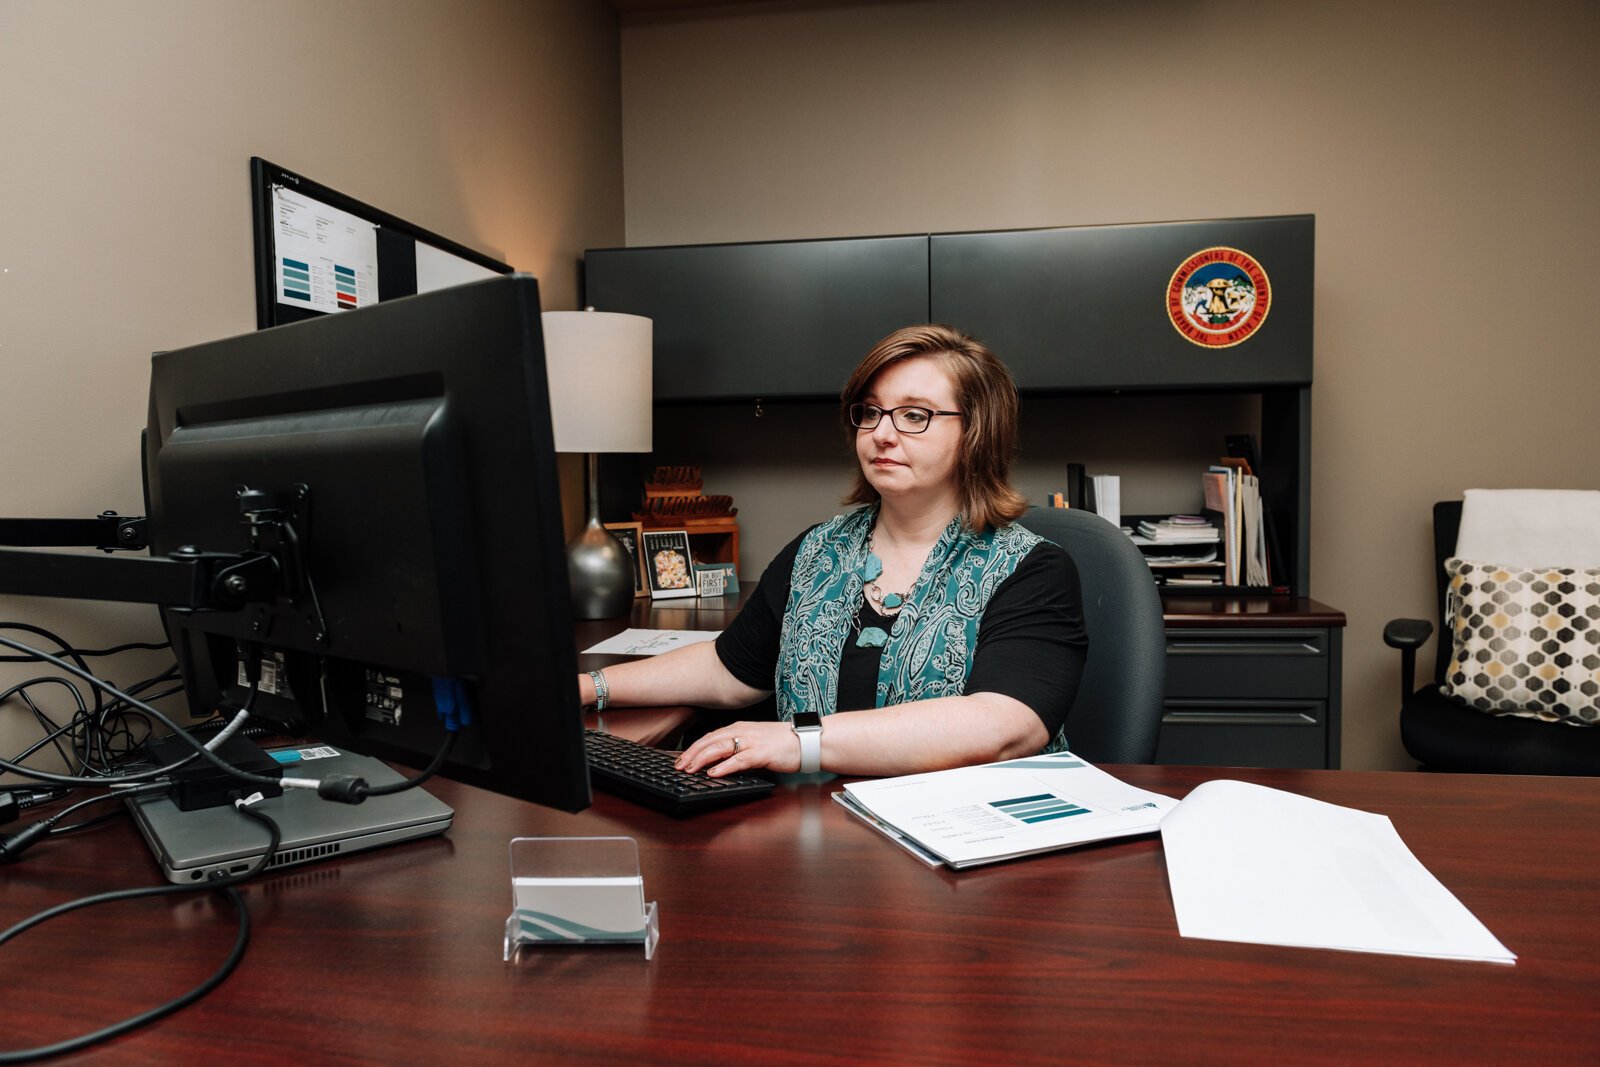 Emily Almodovar, Public Information Officer at Allen County works at her desk at Citizens Square.